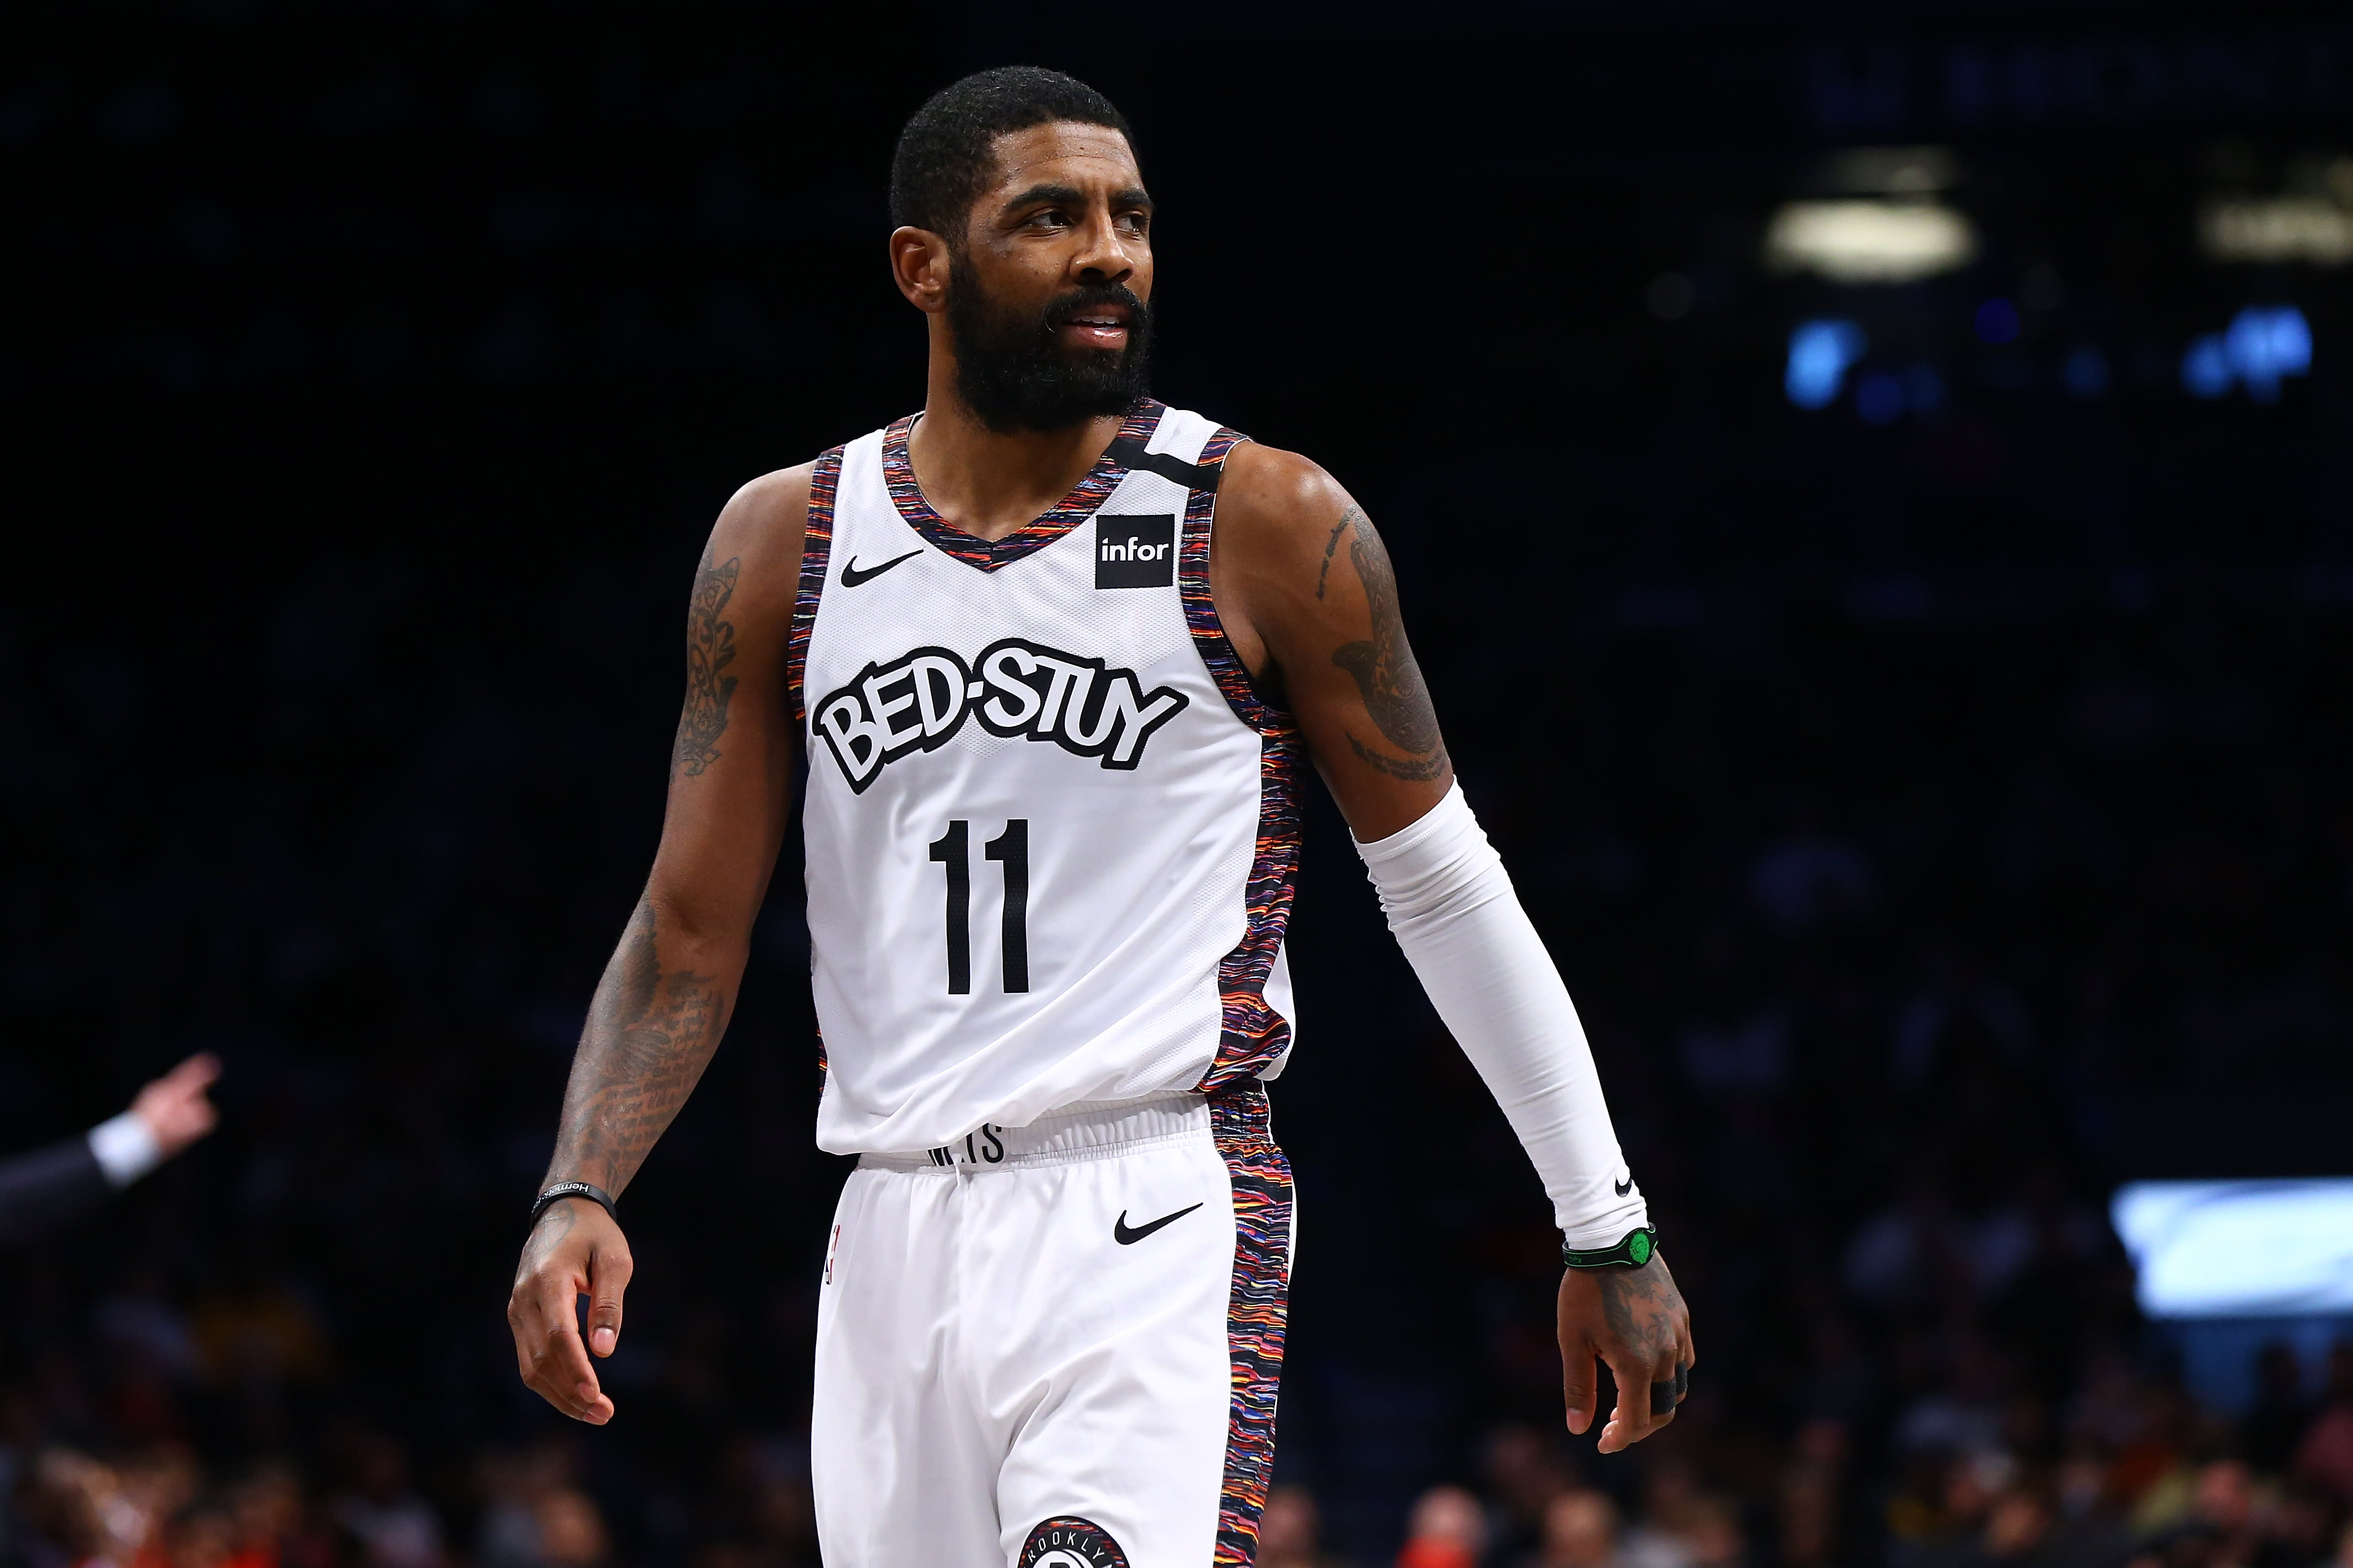 Sources: NBA players express doubts in call with Kyrie Irving